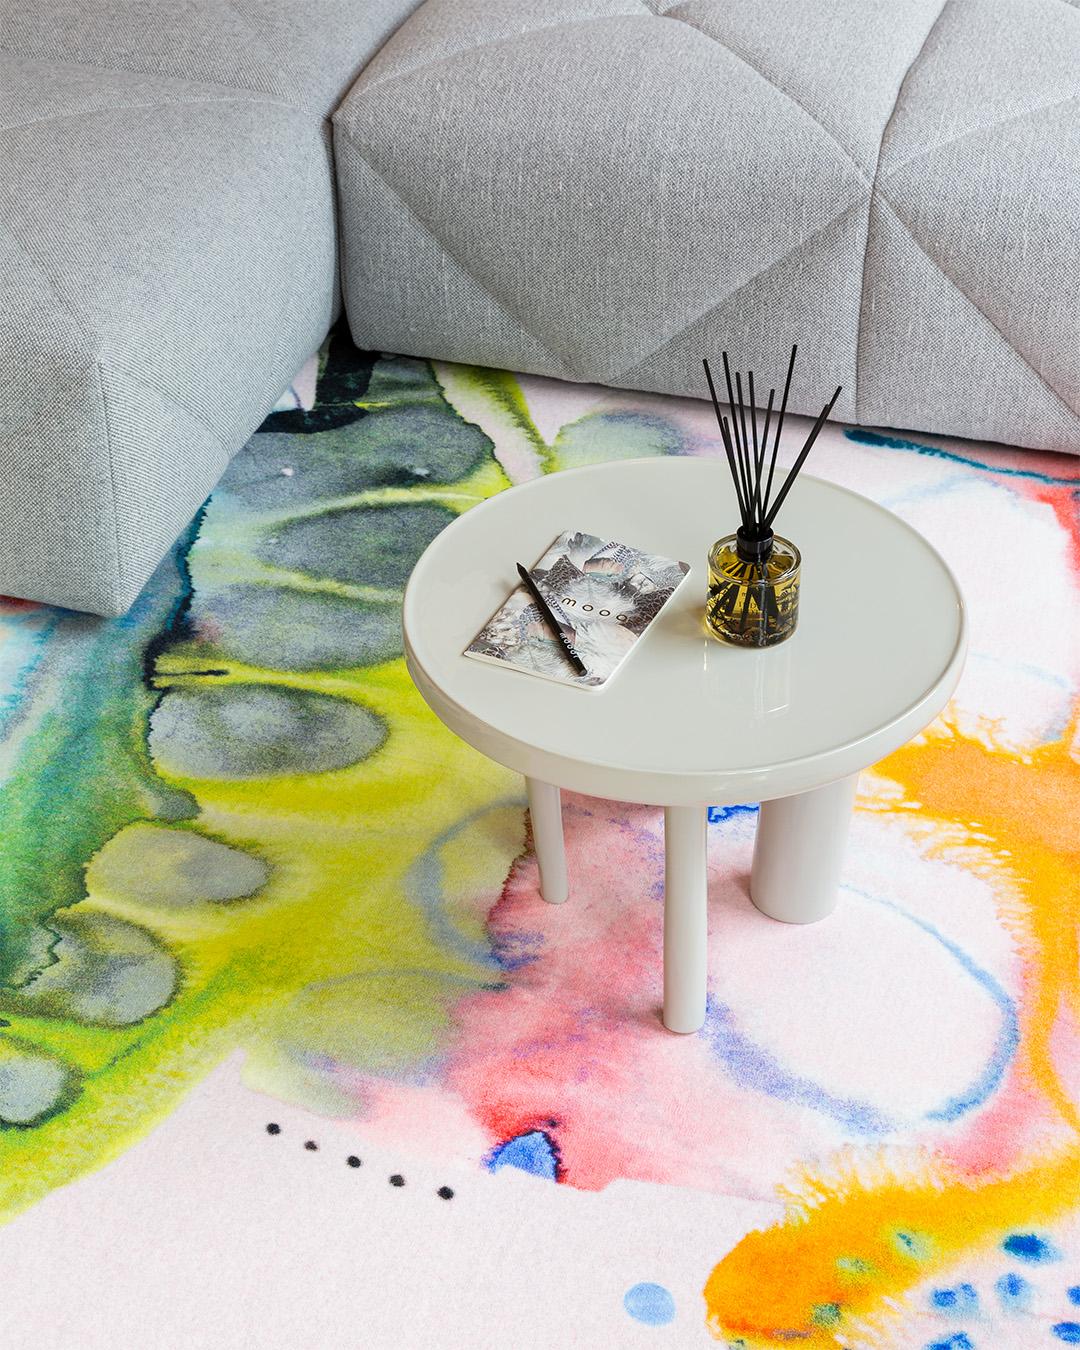 Moooi small wasp II rug in wool with blind hem finish by Emma Larsson.

Emma Larsson is a Stockholm-based artist and illustrator. Her work strikes the balance between colourful dreamscape and inarticulable melancholy. Emma has evolved her practice